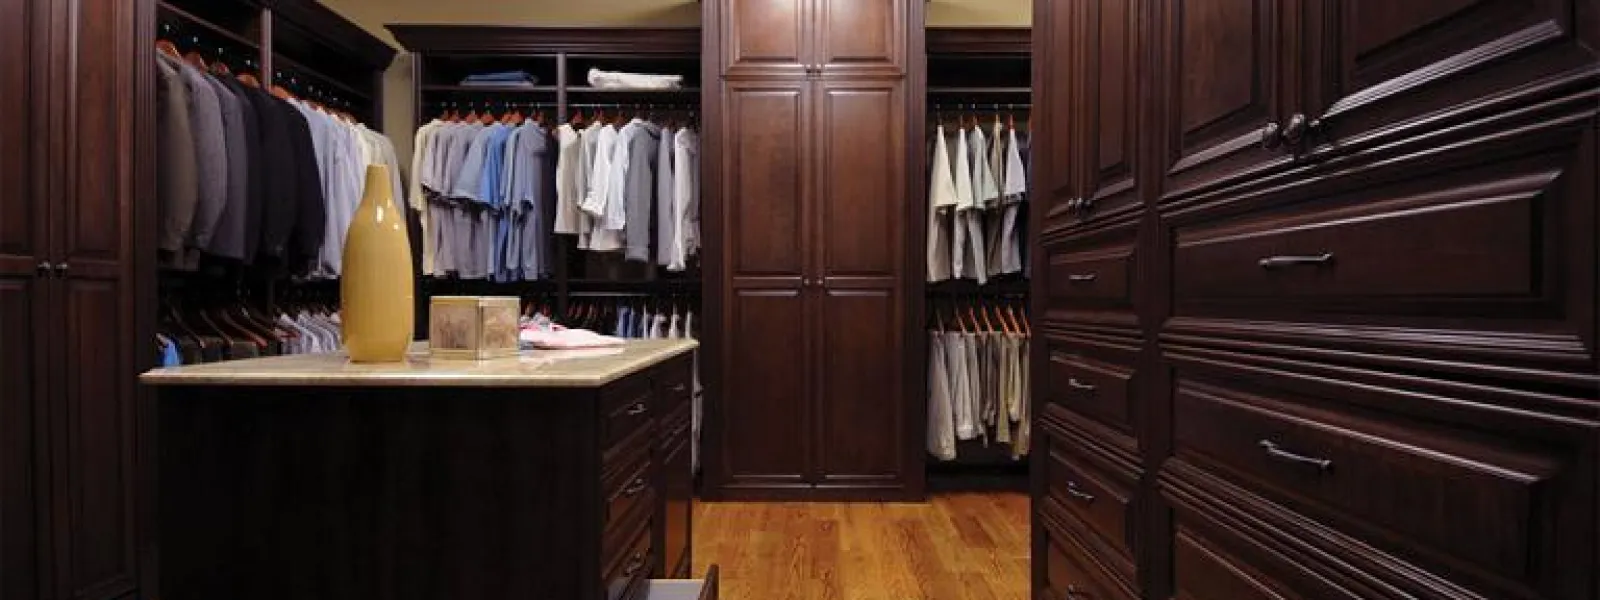 A Look at Our Unique Task Lighting for Your Custom Closets